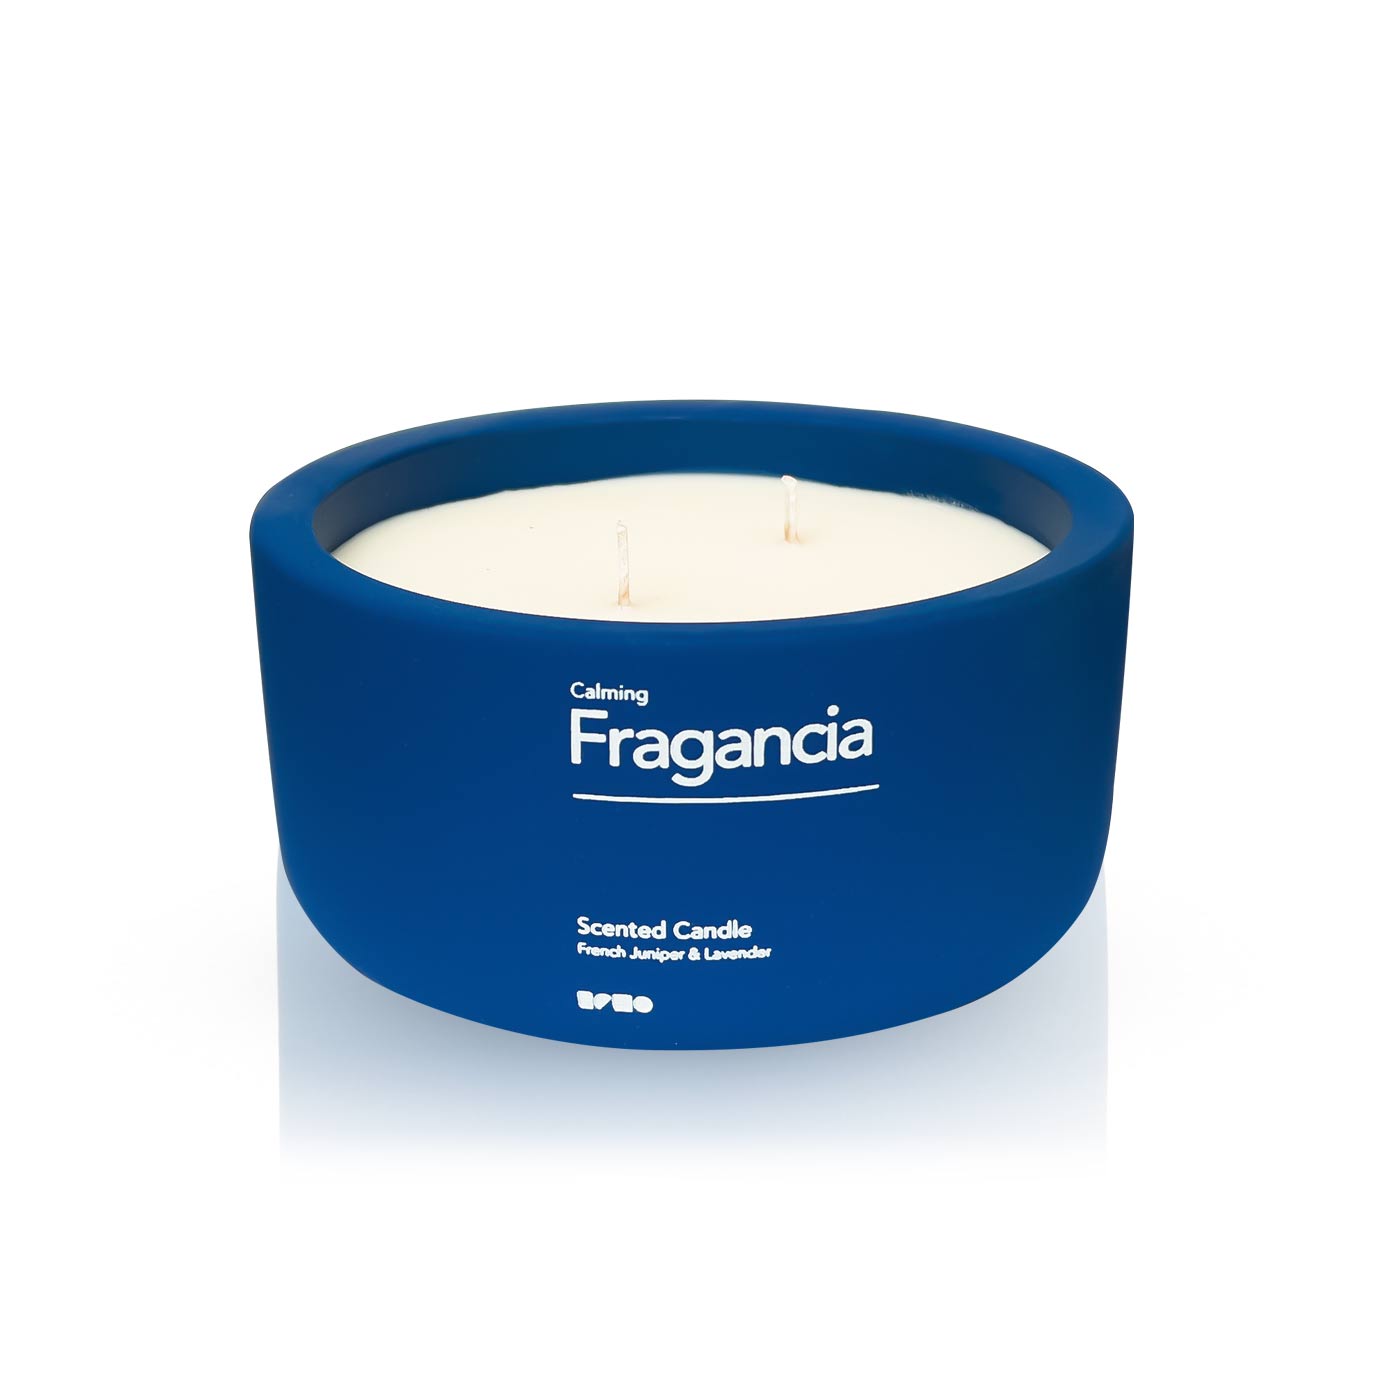 Fragancia Scented Candle